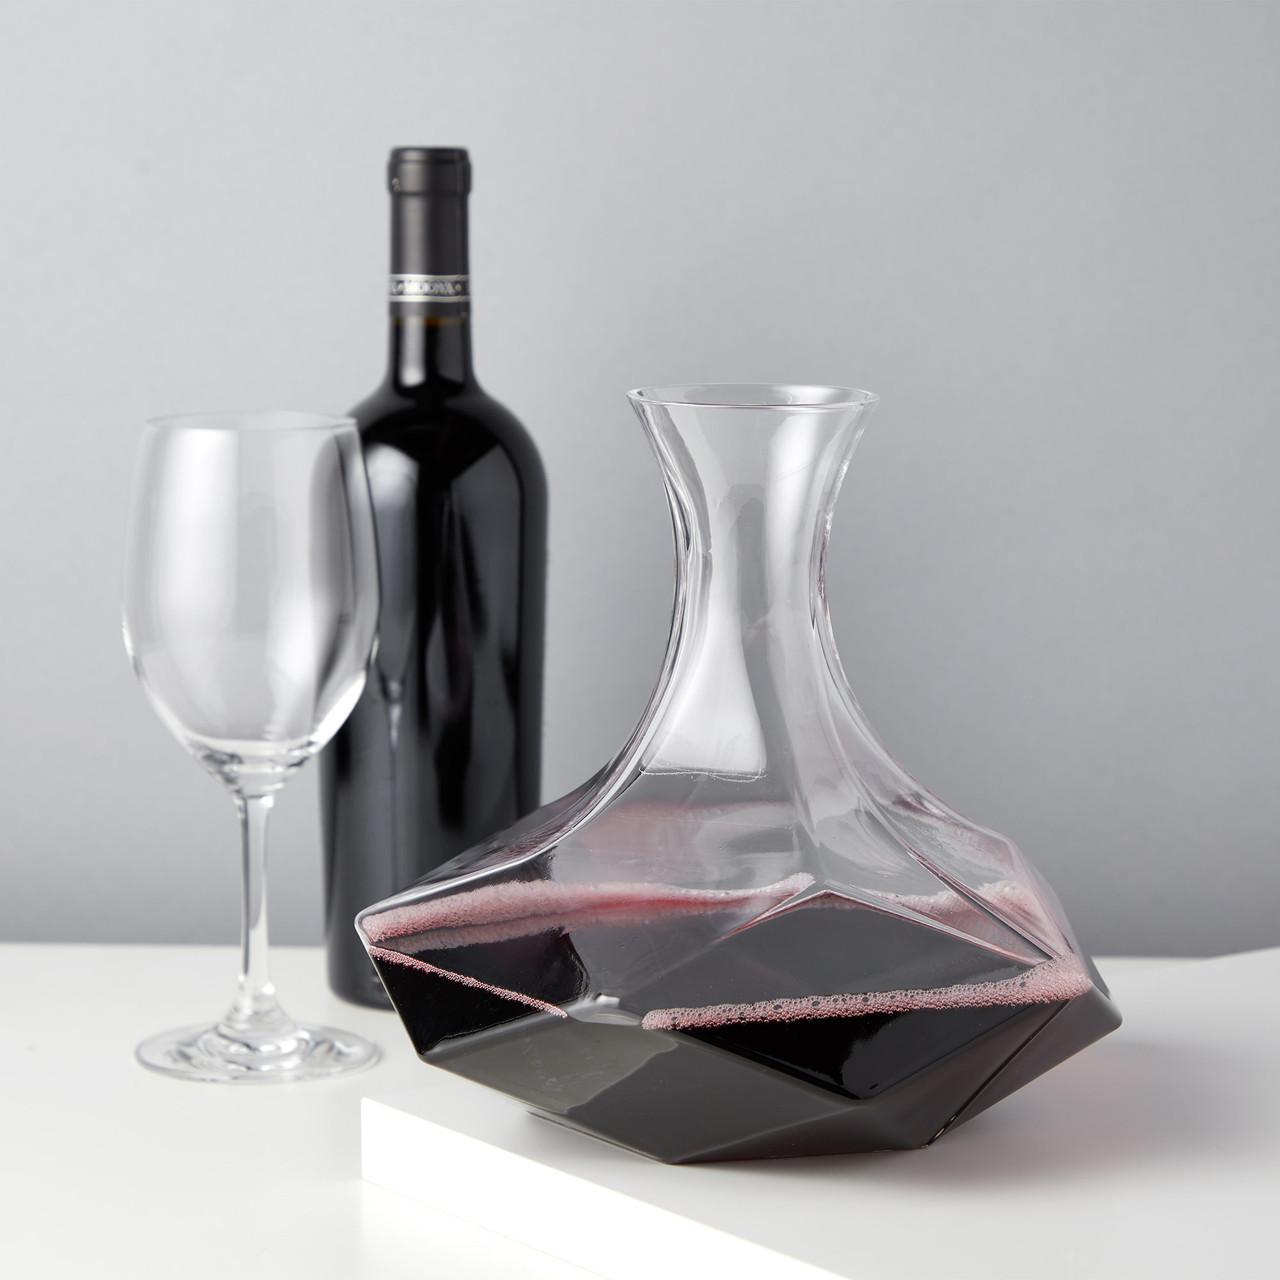 https://cdn11.bigcommerce.com/s-oo0gdojvjo/images/stencil/1280x1280/products/68382/100492/faceted-crystal-wine-decanter-by-viski-2__07378.1682591912.jpg?c=2&imbypass=on